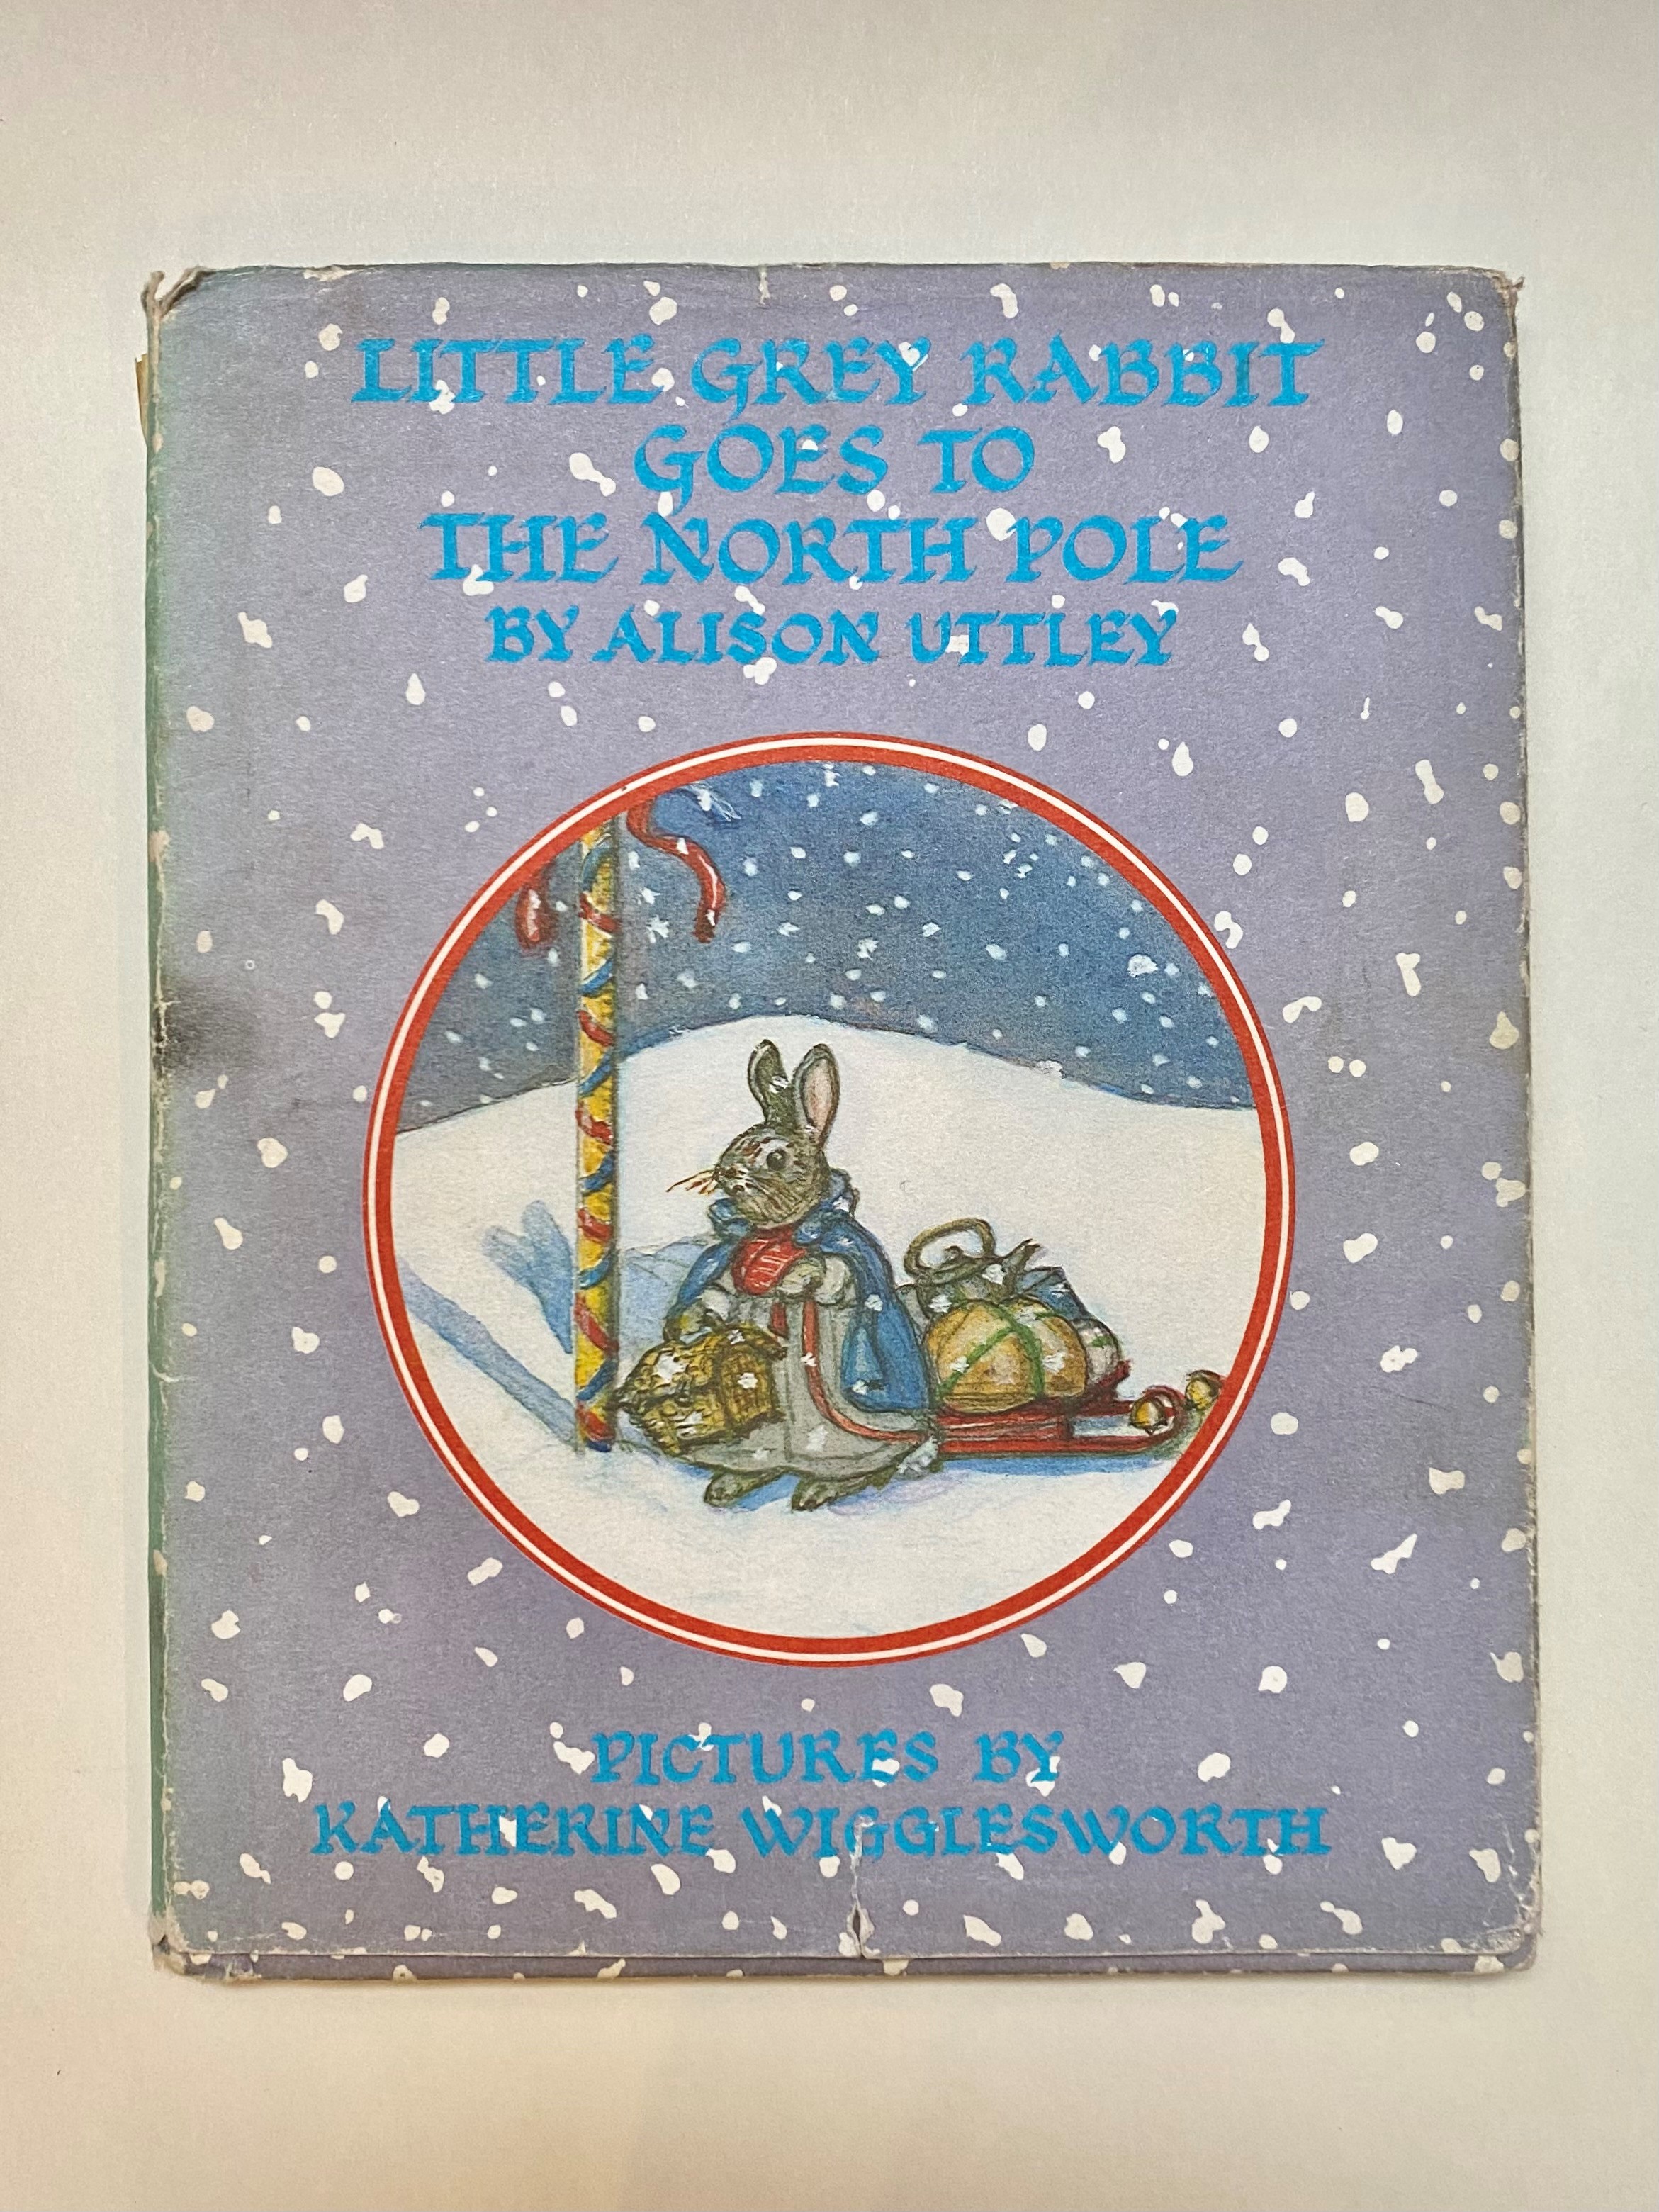 Little Grey Rabbit Goes to The North Pole